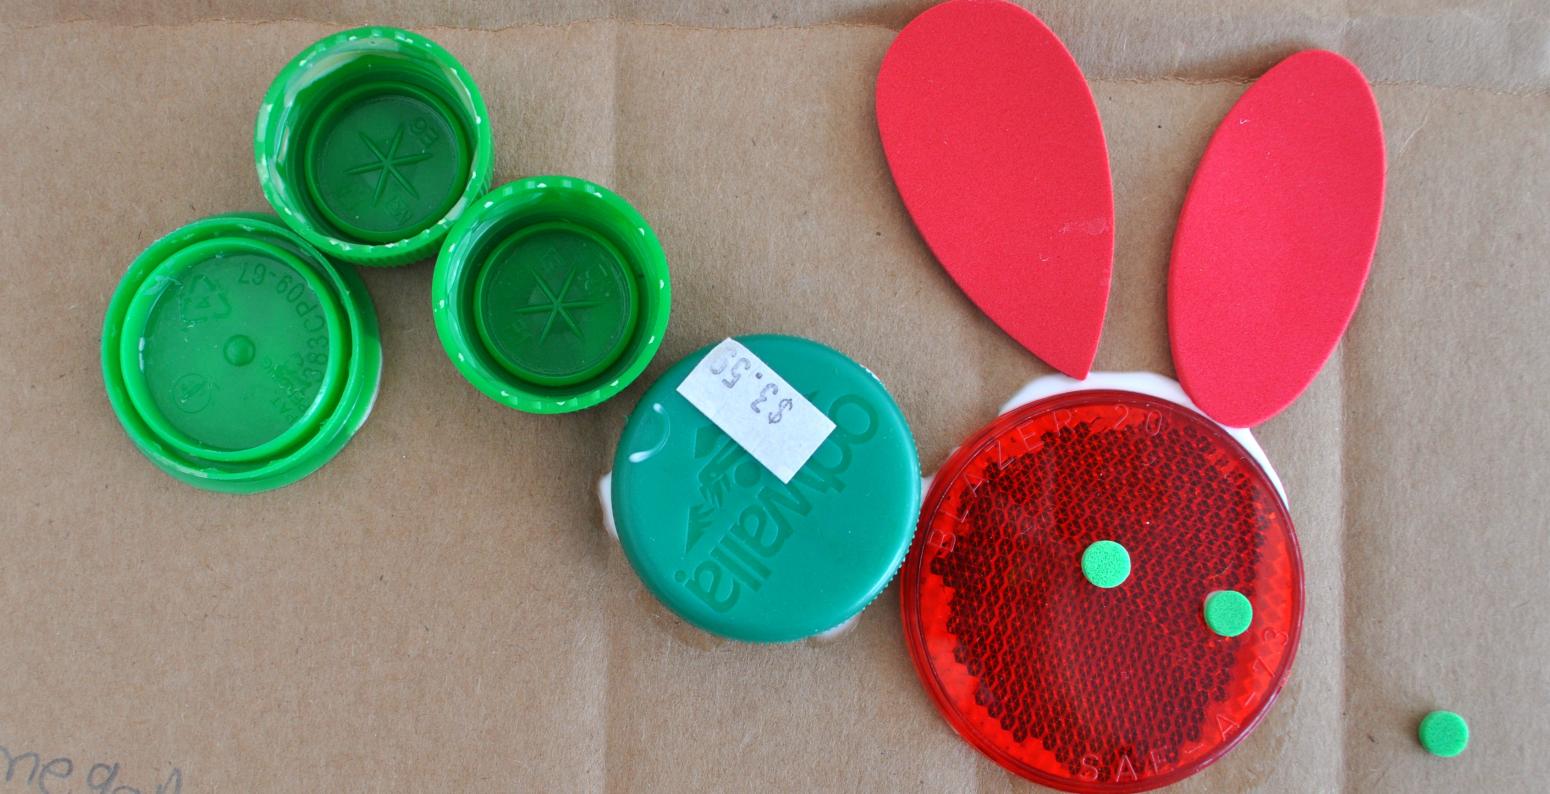 A Very Hungry Caterpillar made from red and green found materials including bottle caps and styrofoam shapes.